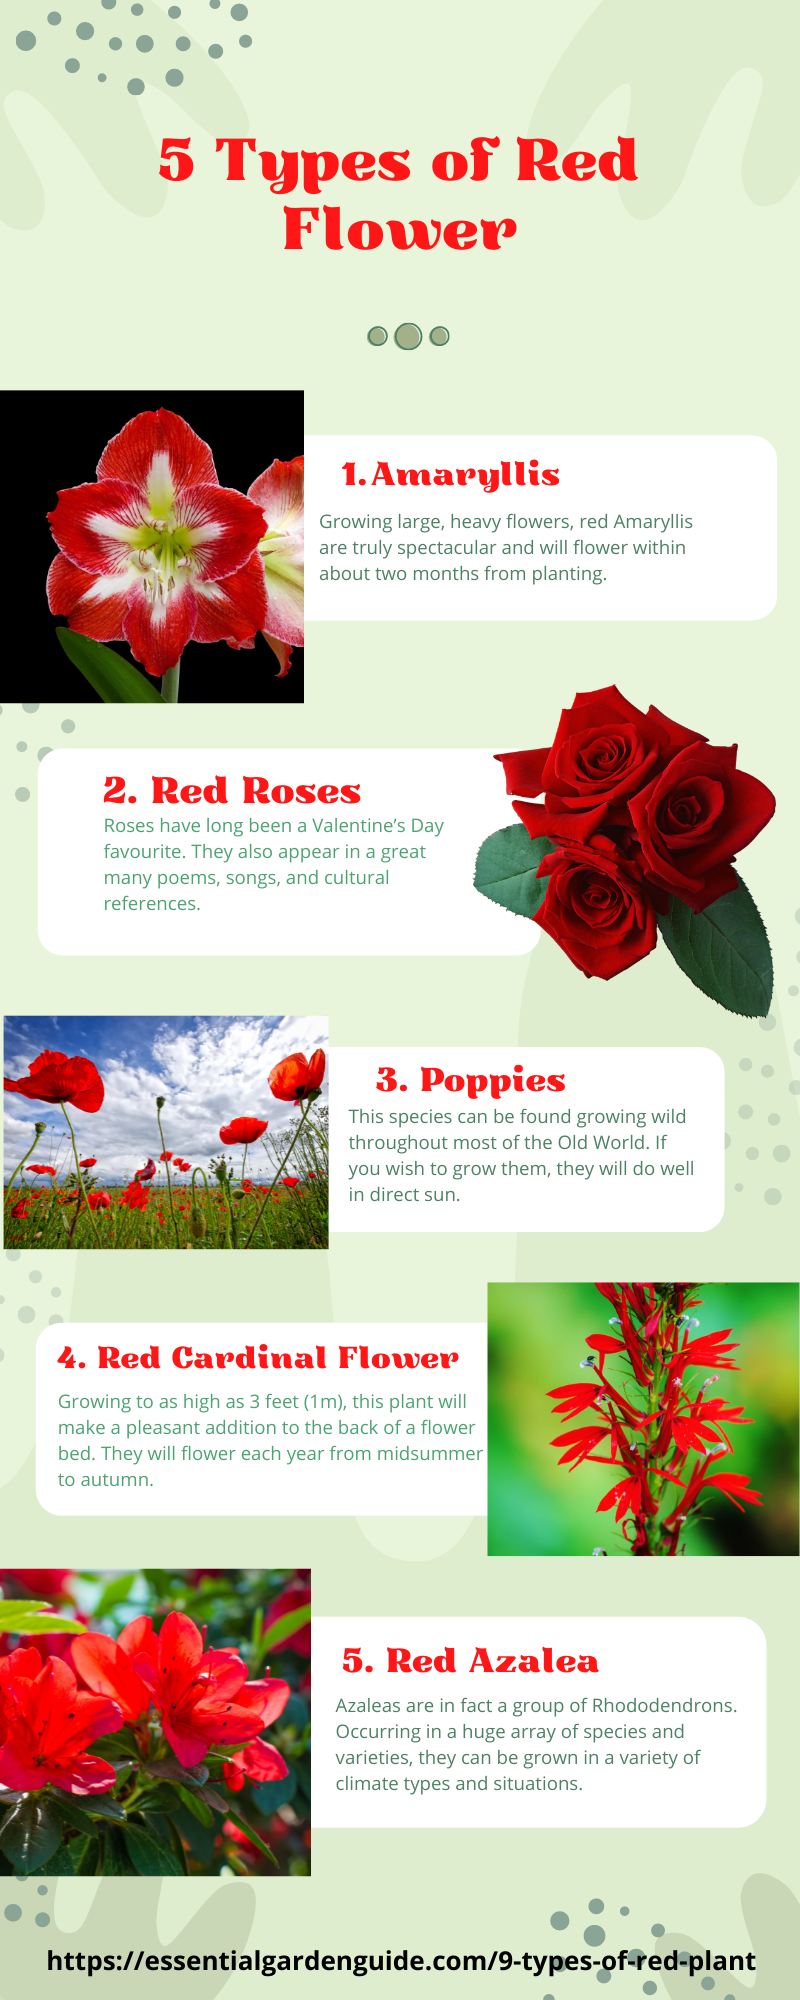 5 Types of Red Flower